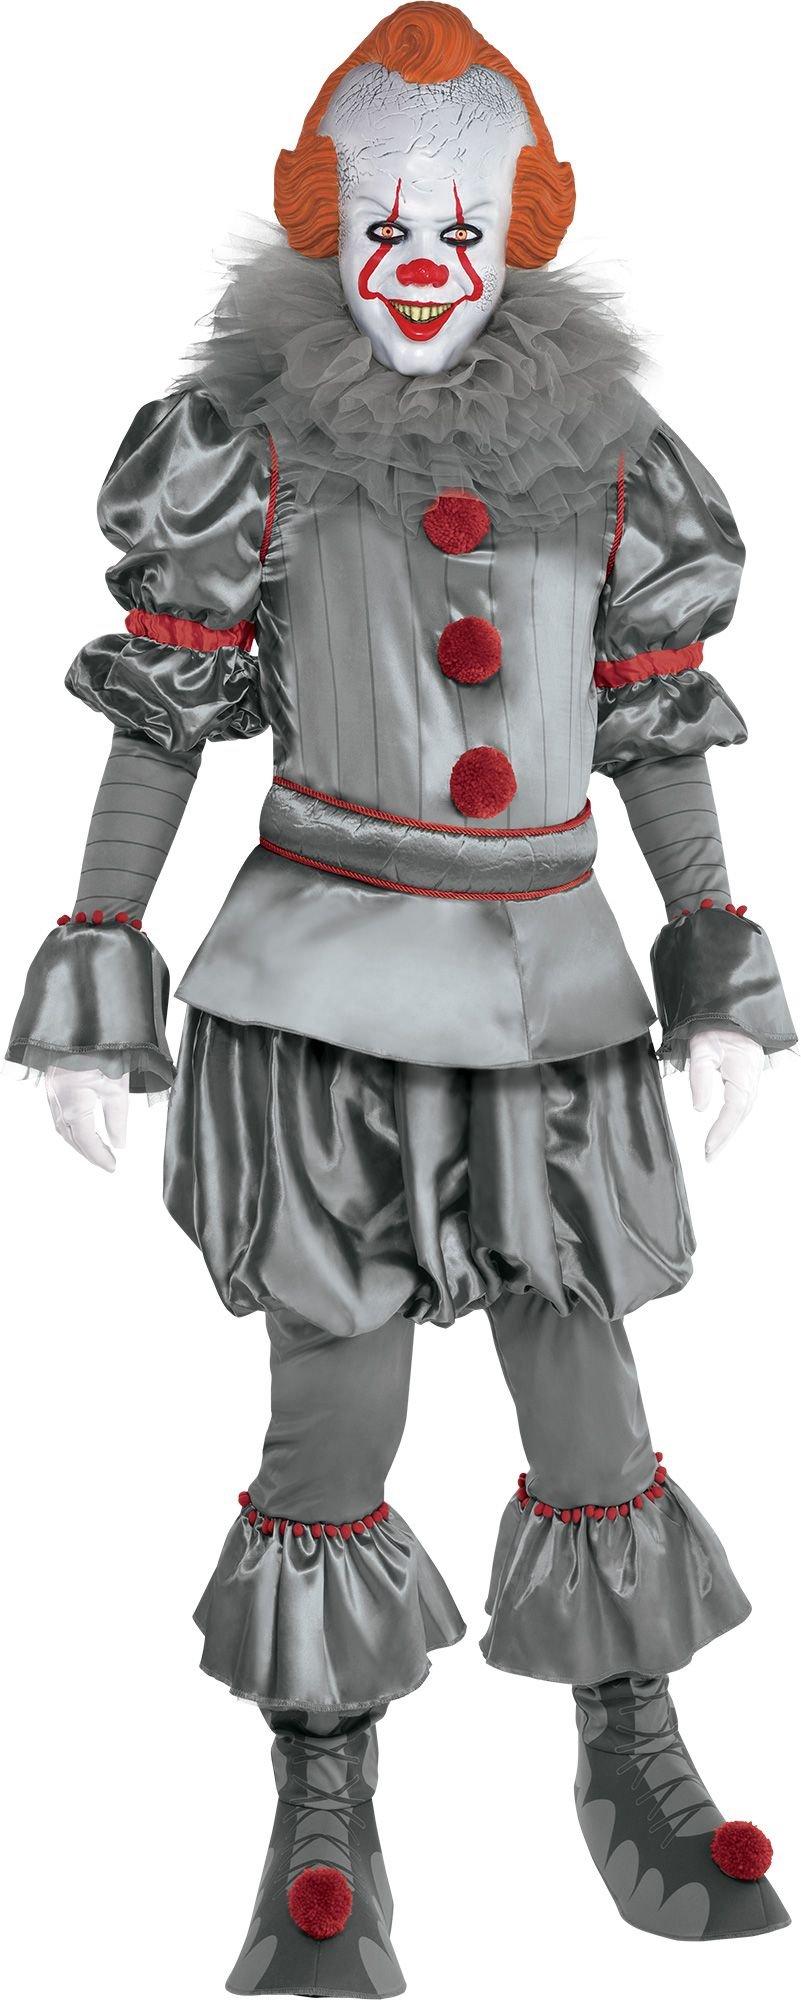 Pennywise Costumes - IT Costumes for Halloween | Party City